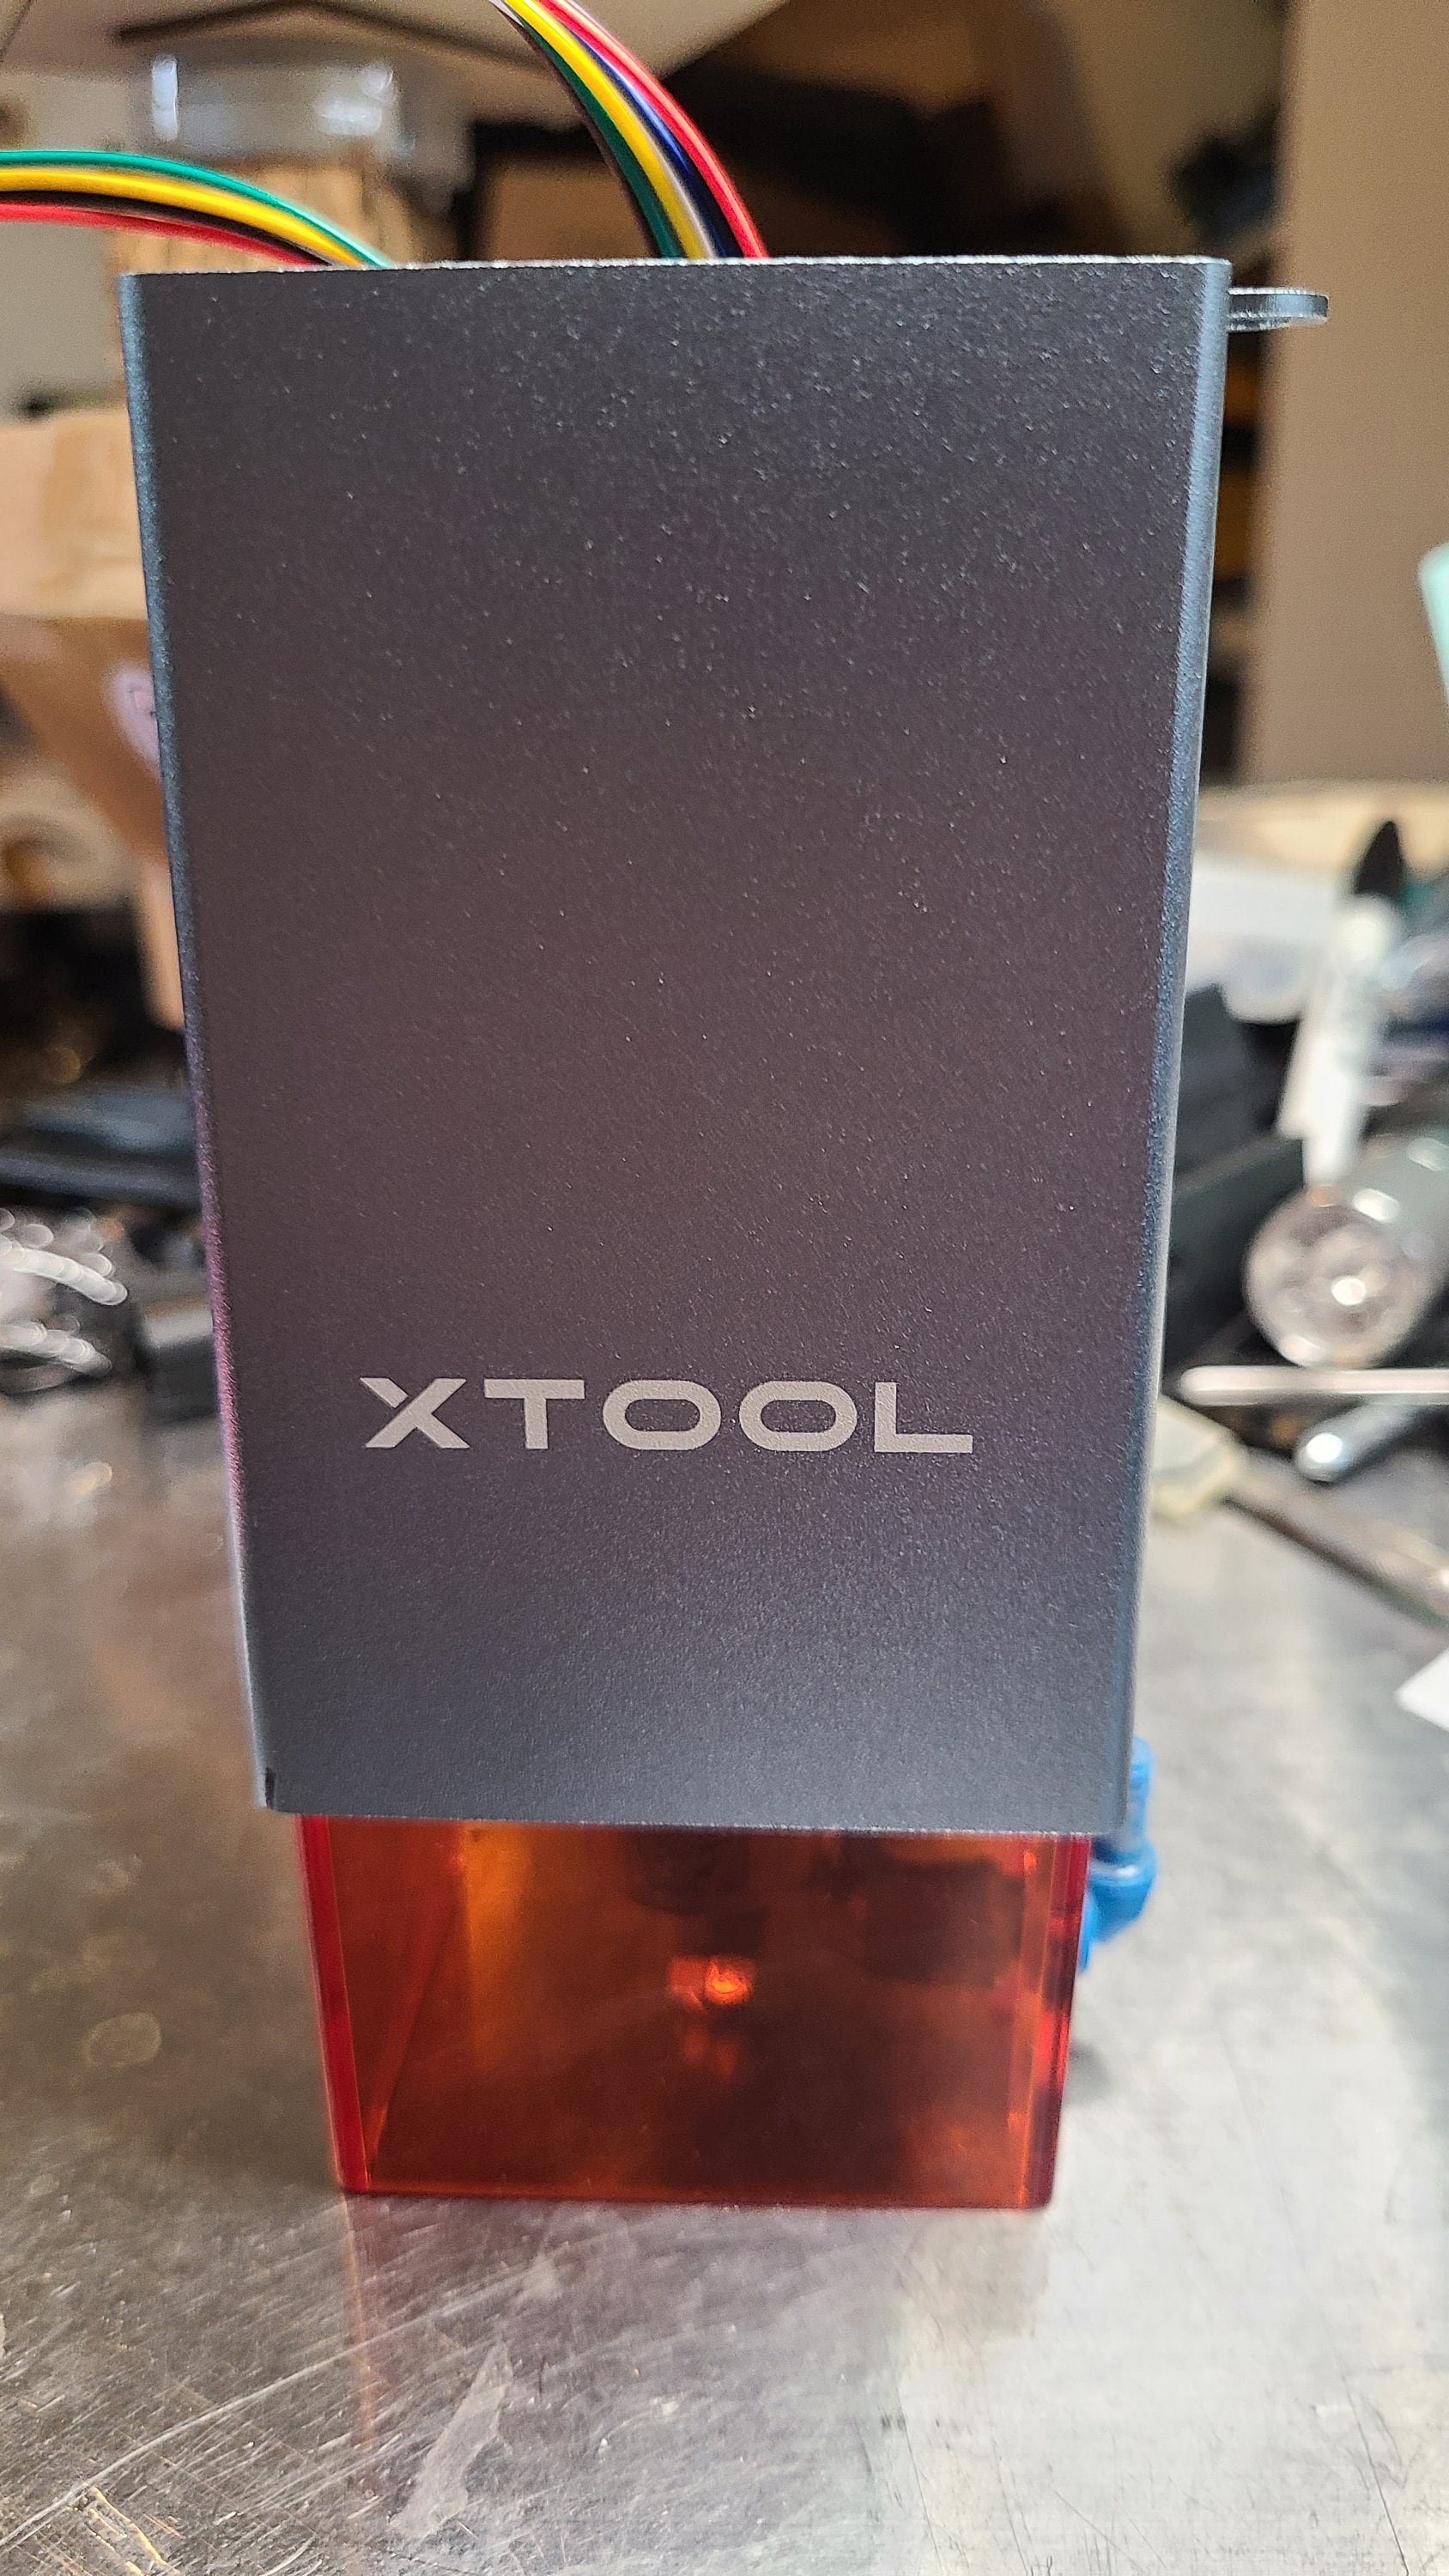 xTool D1 Owner Group